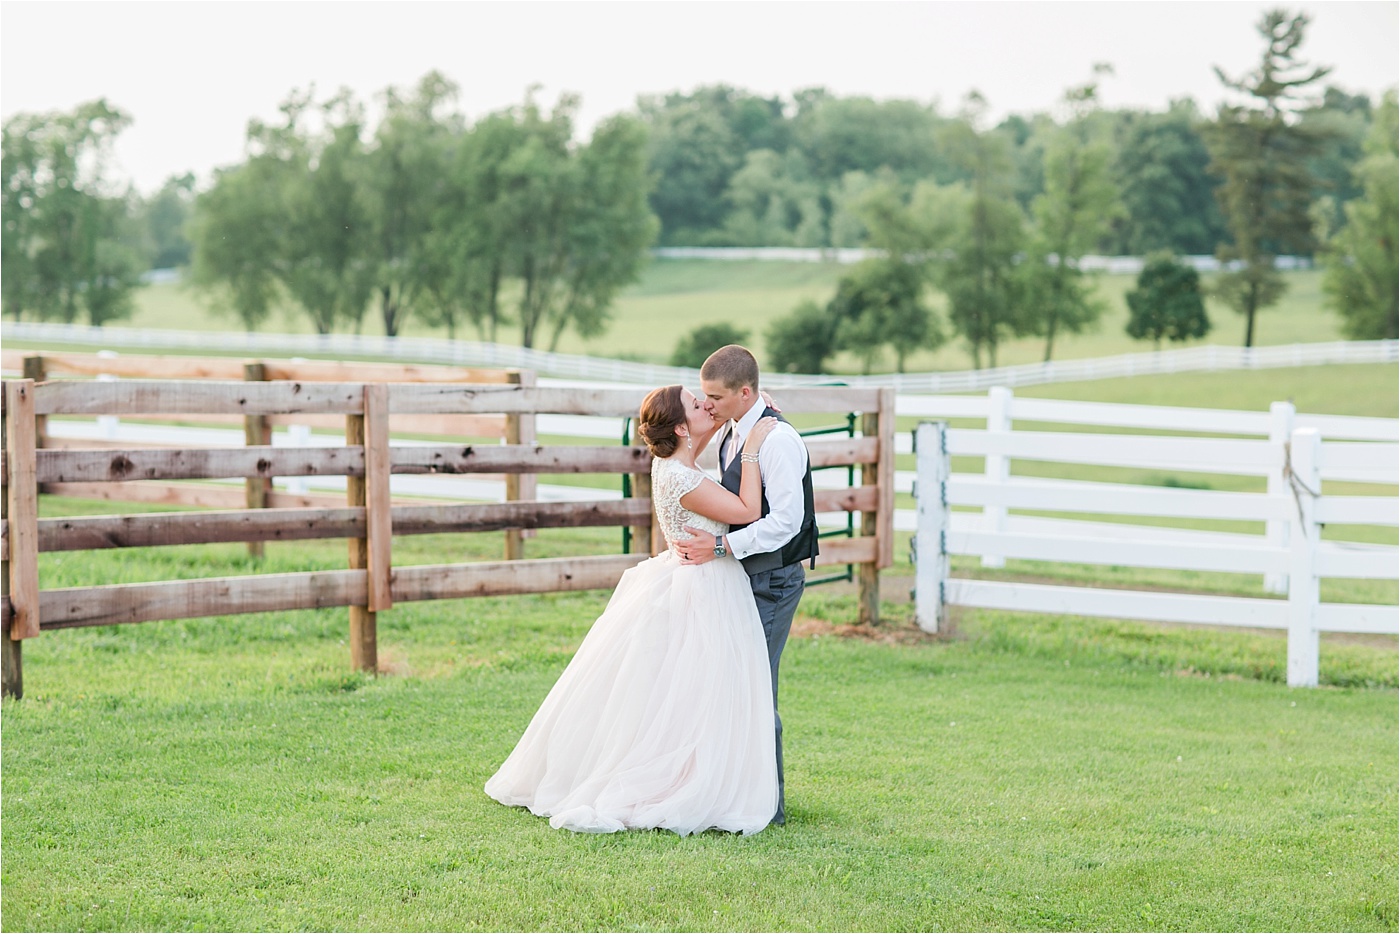 A Blush Outdoor wedding at Irongate Equestrian | KariMe Photography_0184